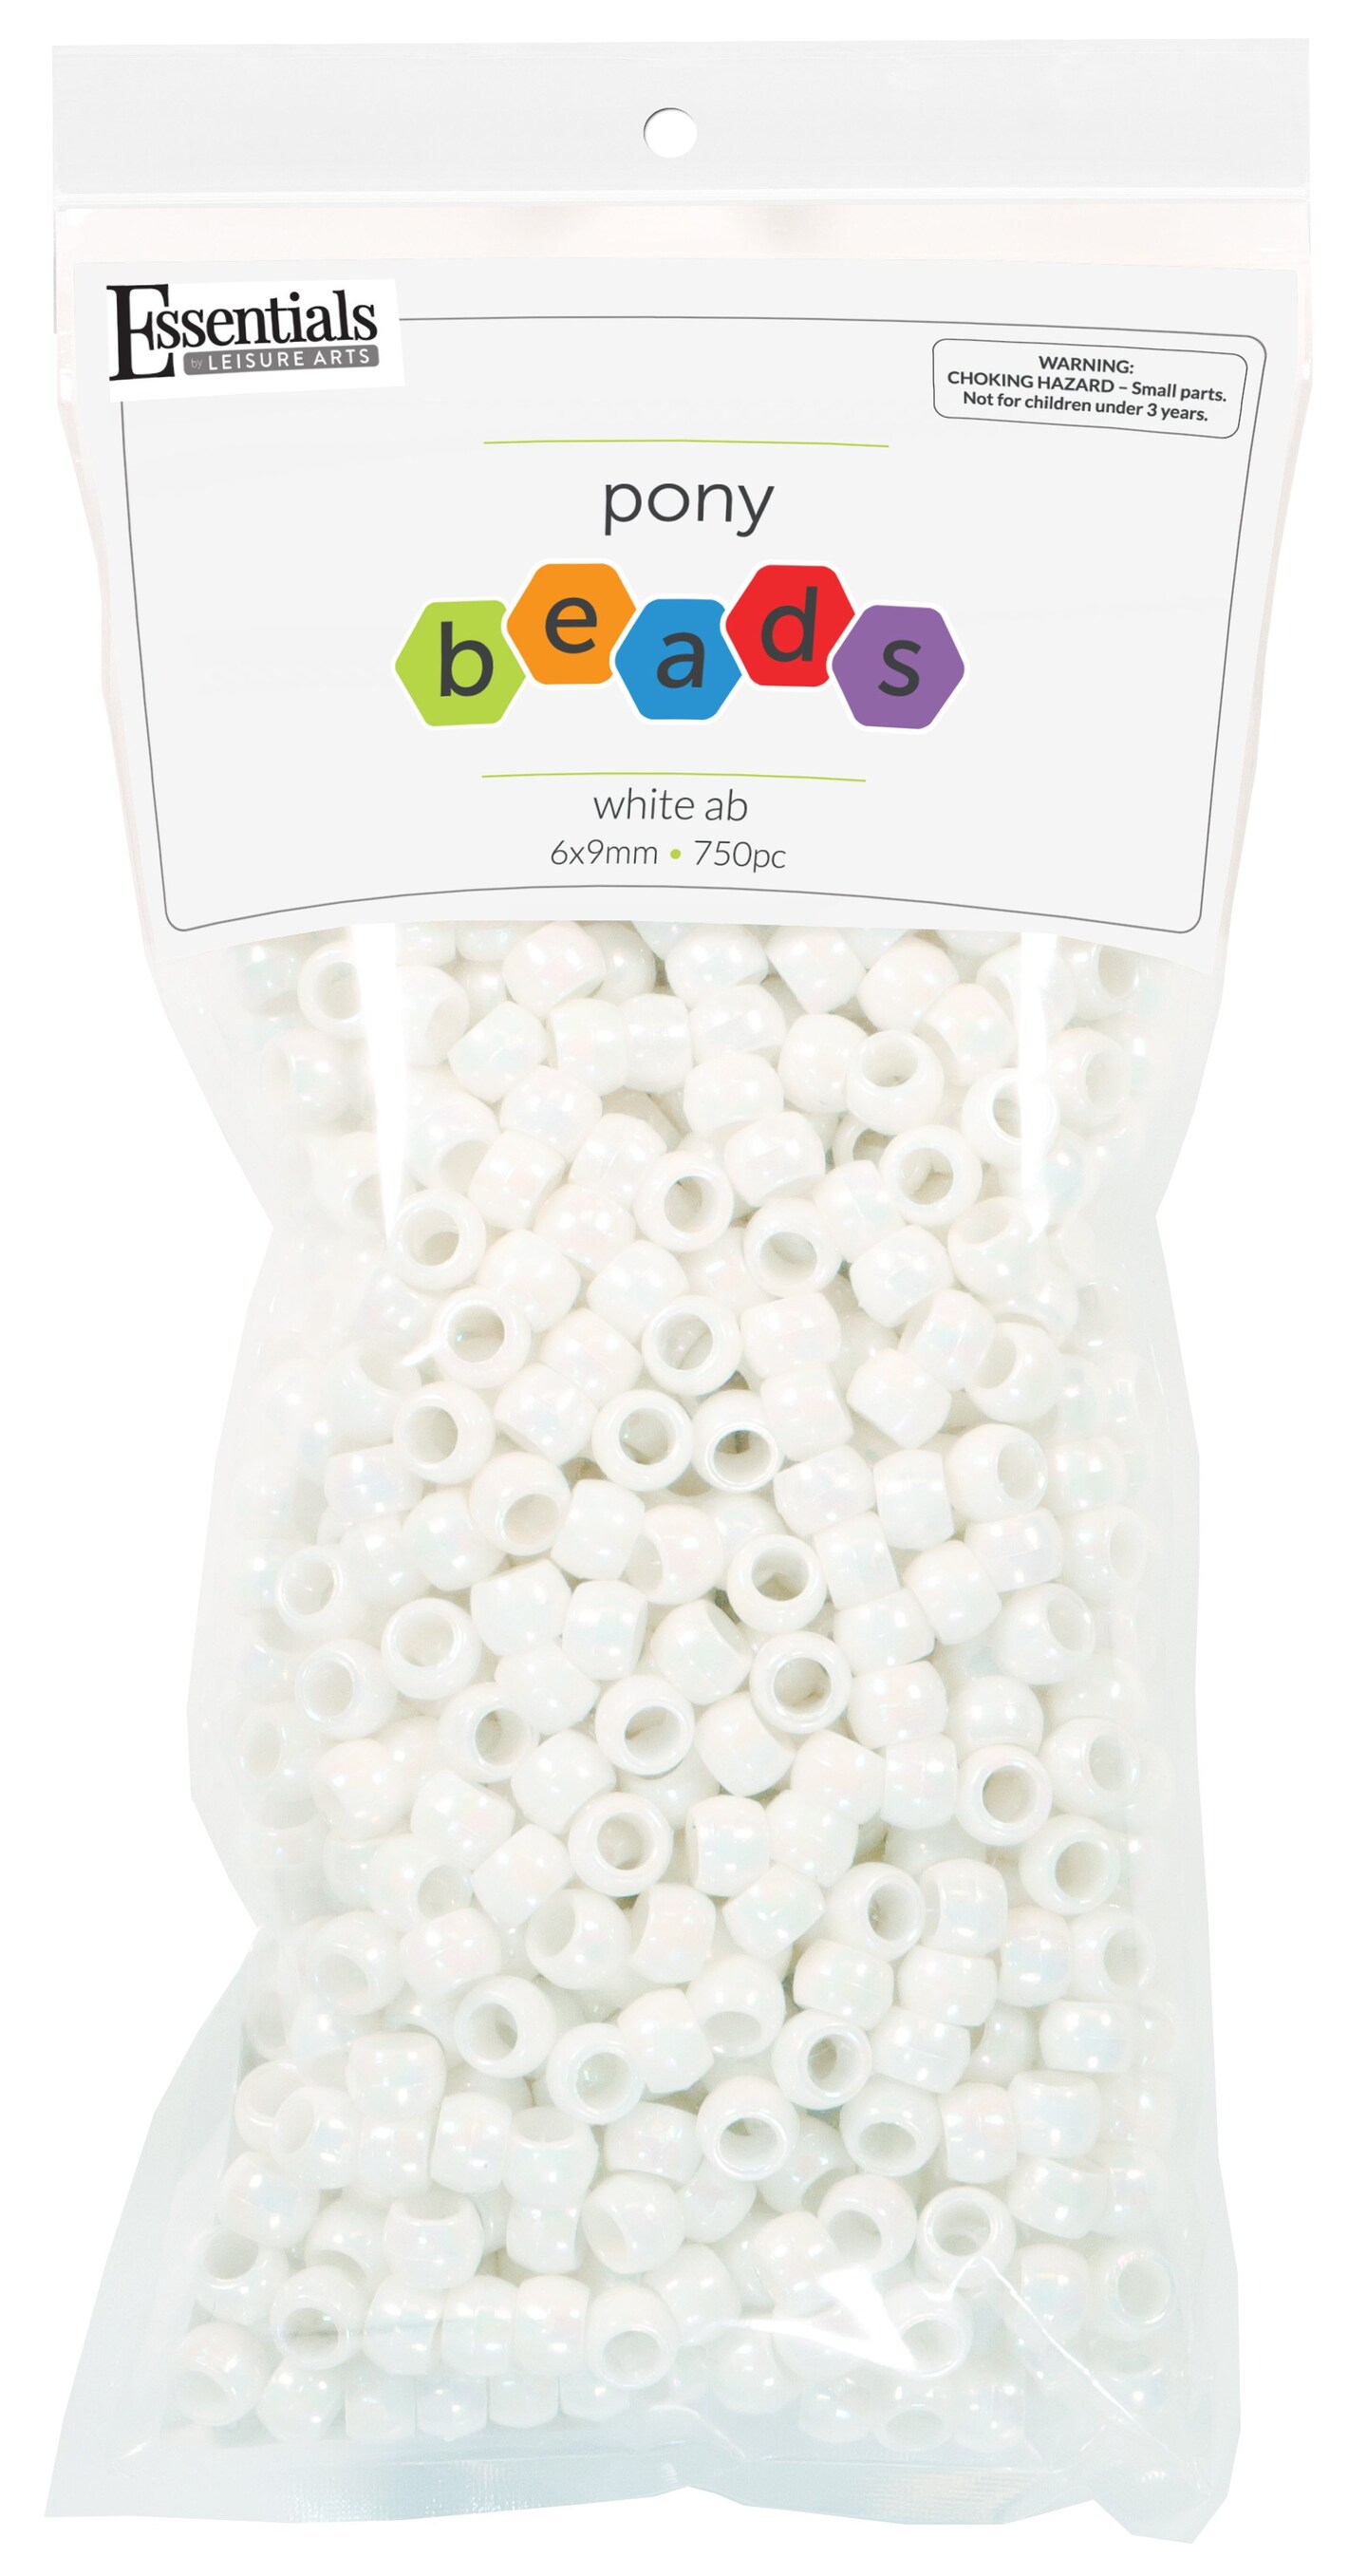 Essentials by Leisure Arts Pony Bead 6mm x 9mm Aurora Borealis White Opaque Plastic Pony Beads Bulk 750 pieces for Arts, Crafts, Bracelet, Necklace, Jewelry Making, Earring, Hair Braiding